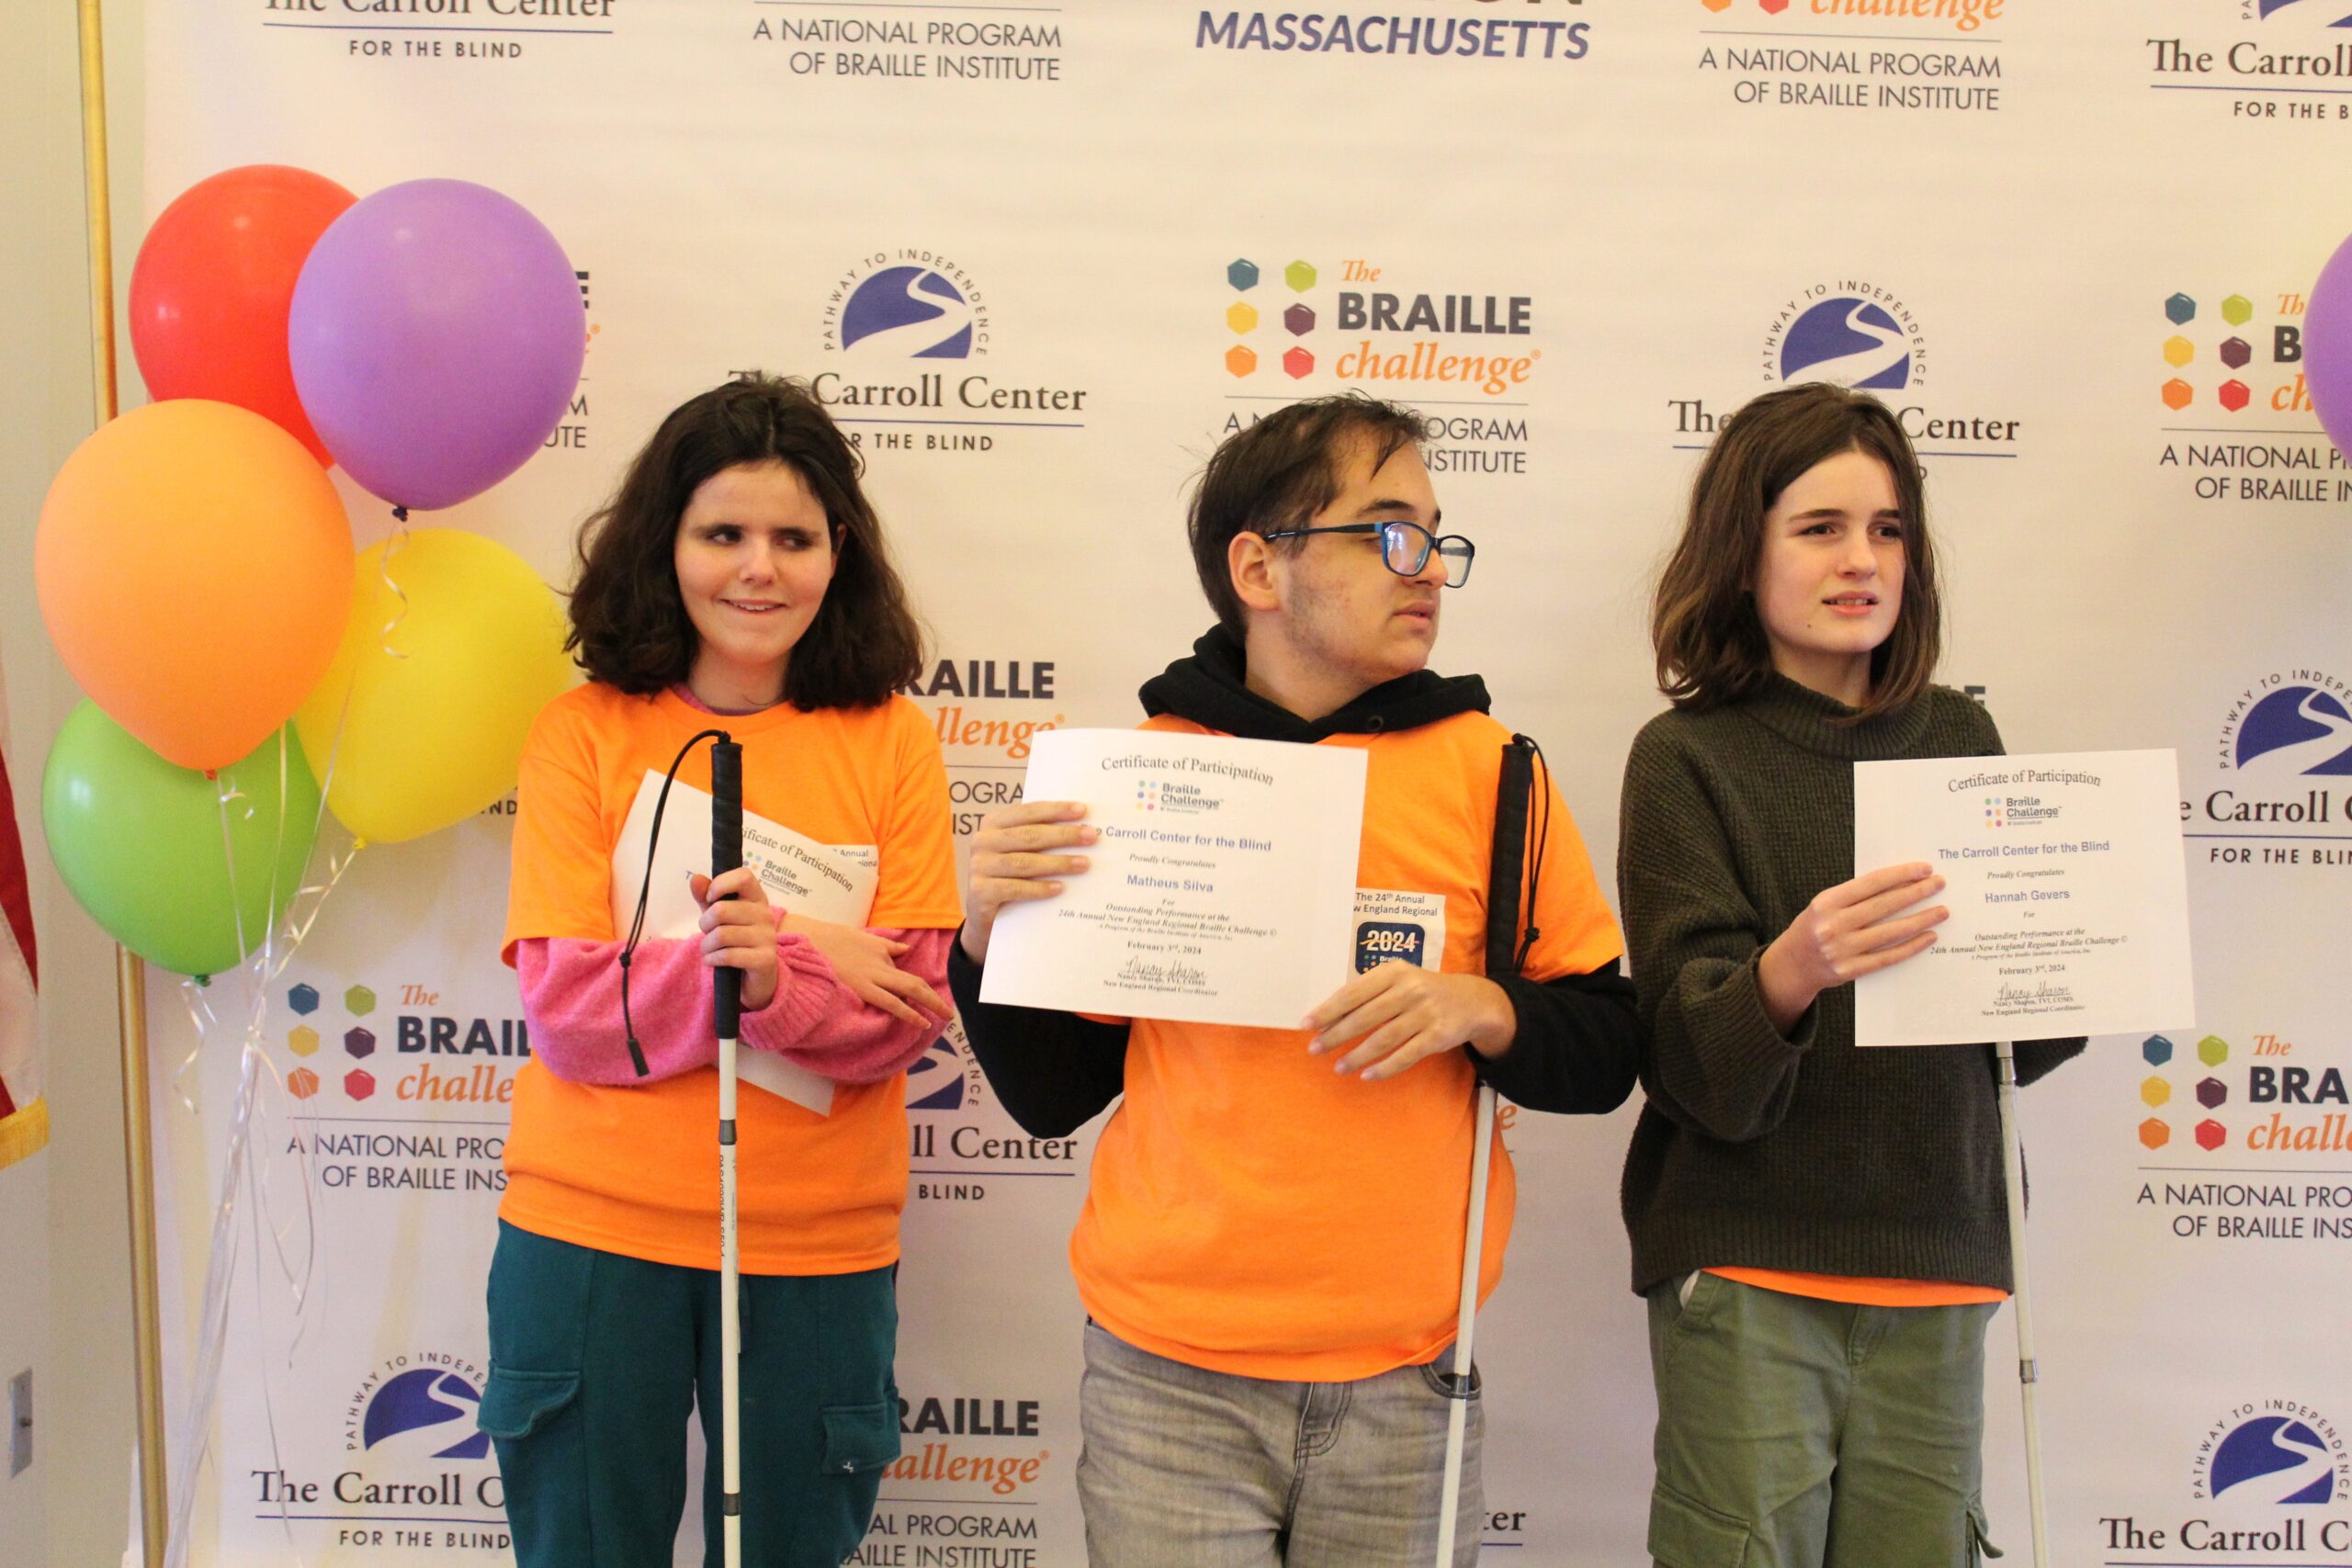 3 Braille Challenge participants smiling for a photo with certificates in front of the Carroll Center Braille Challenge backdrop